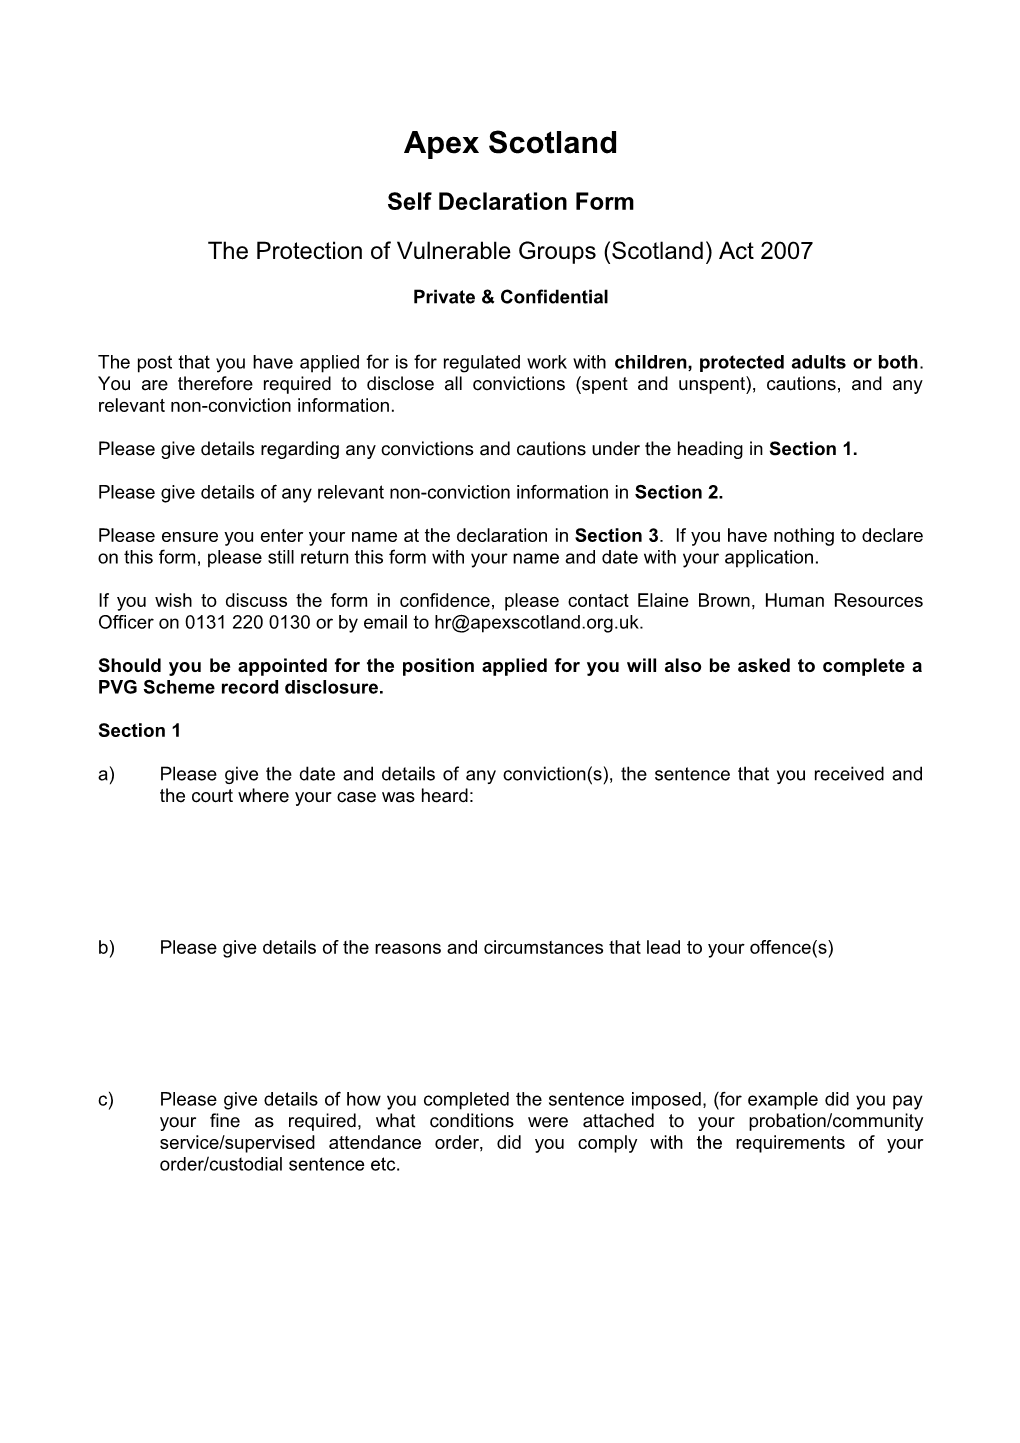 The Protection of Vulnerable Groups (Scotland) Act 2007